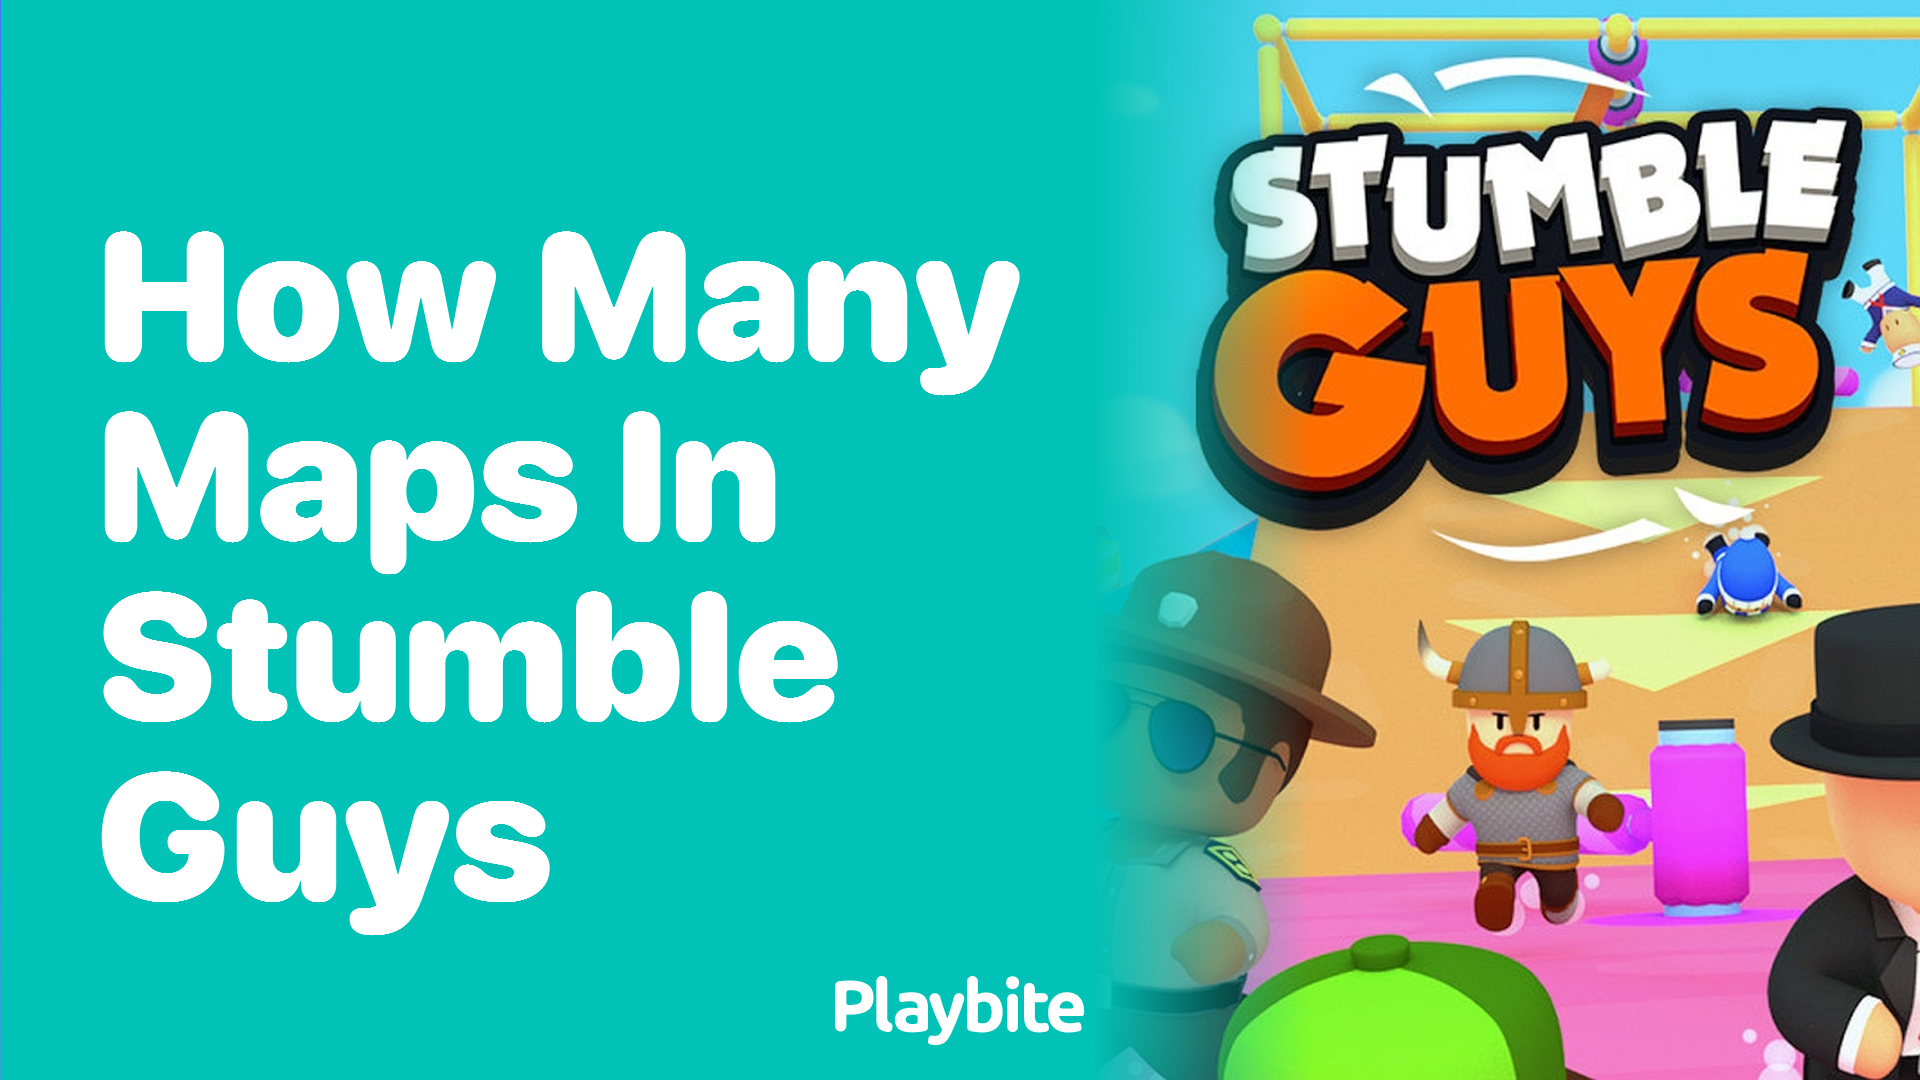 How Many Maps Are in Stumble Guys?